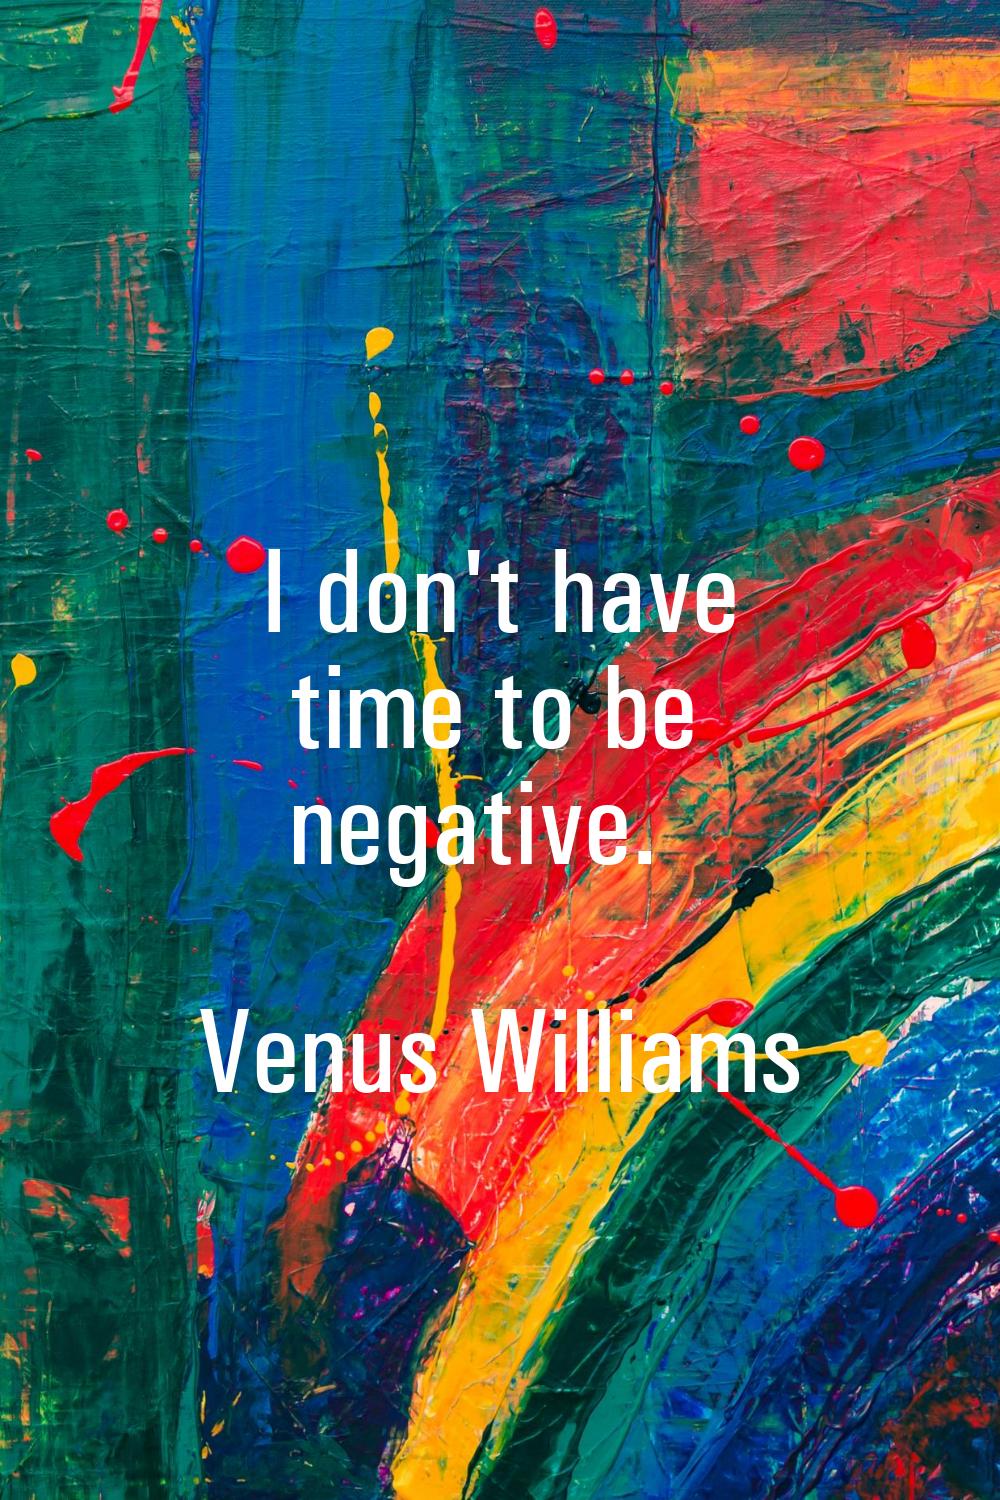 I don't have time to be negative.